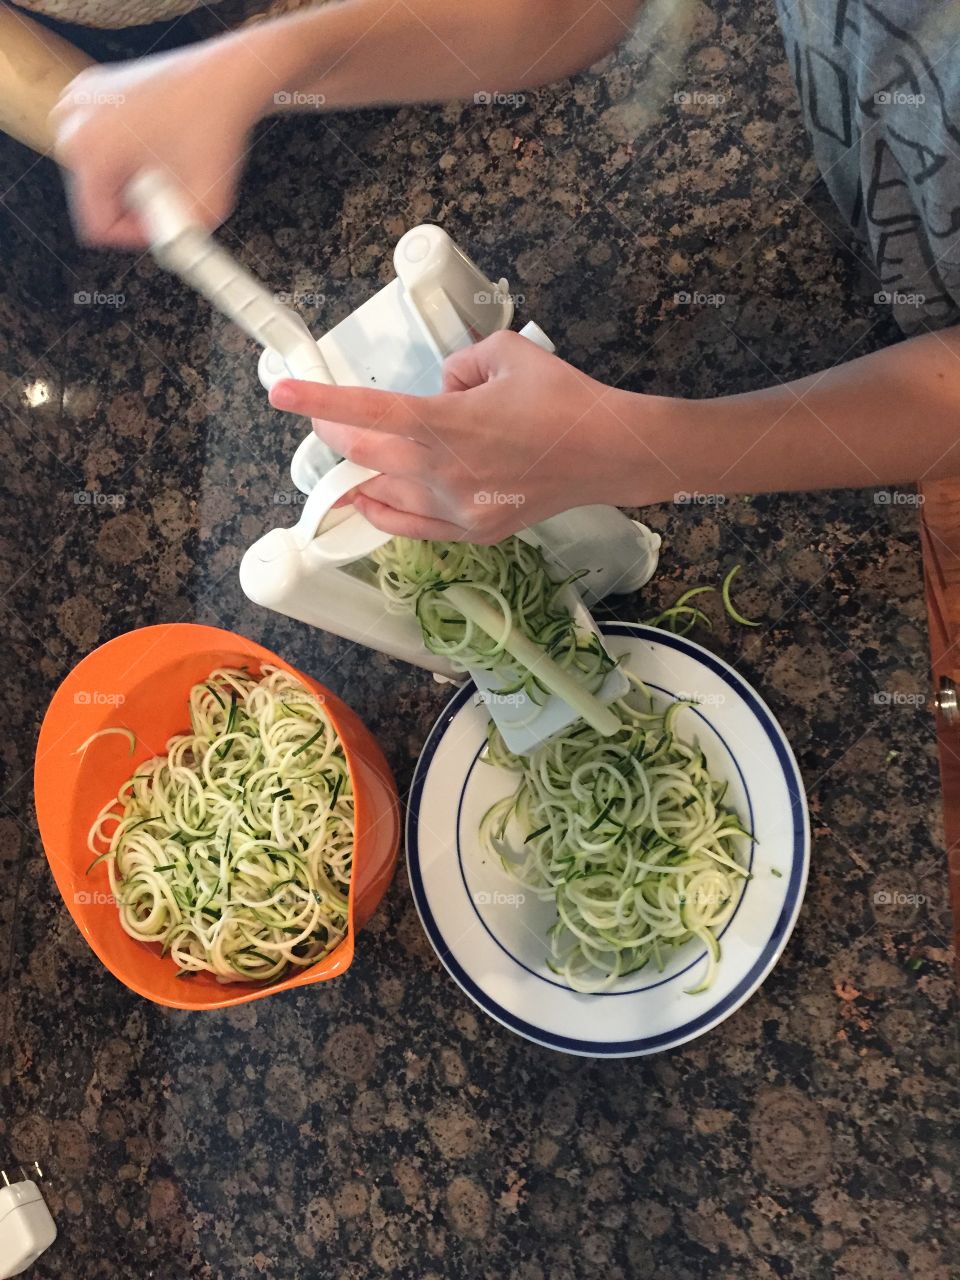 Learning to make zucchini noodles is fun!